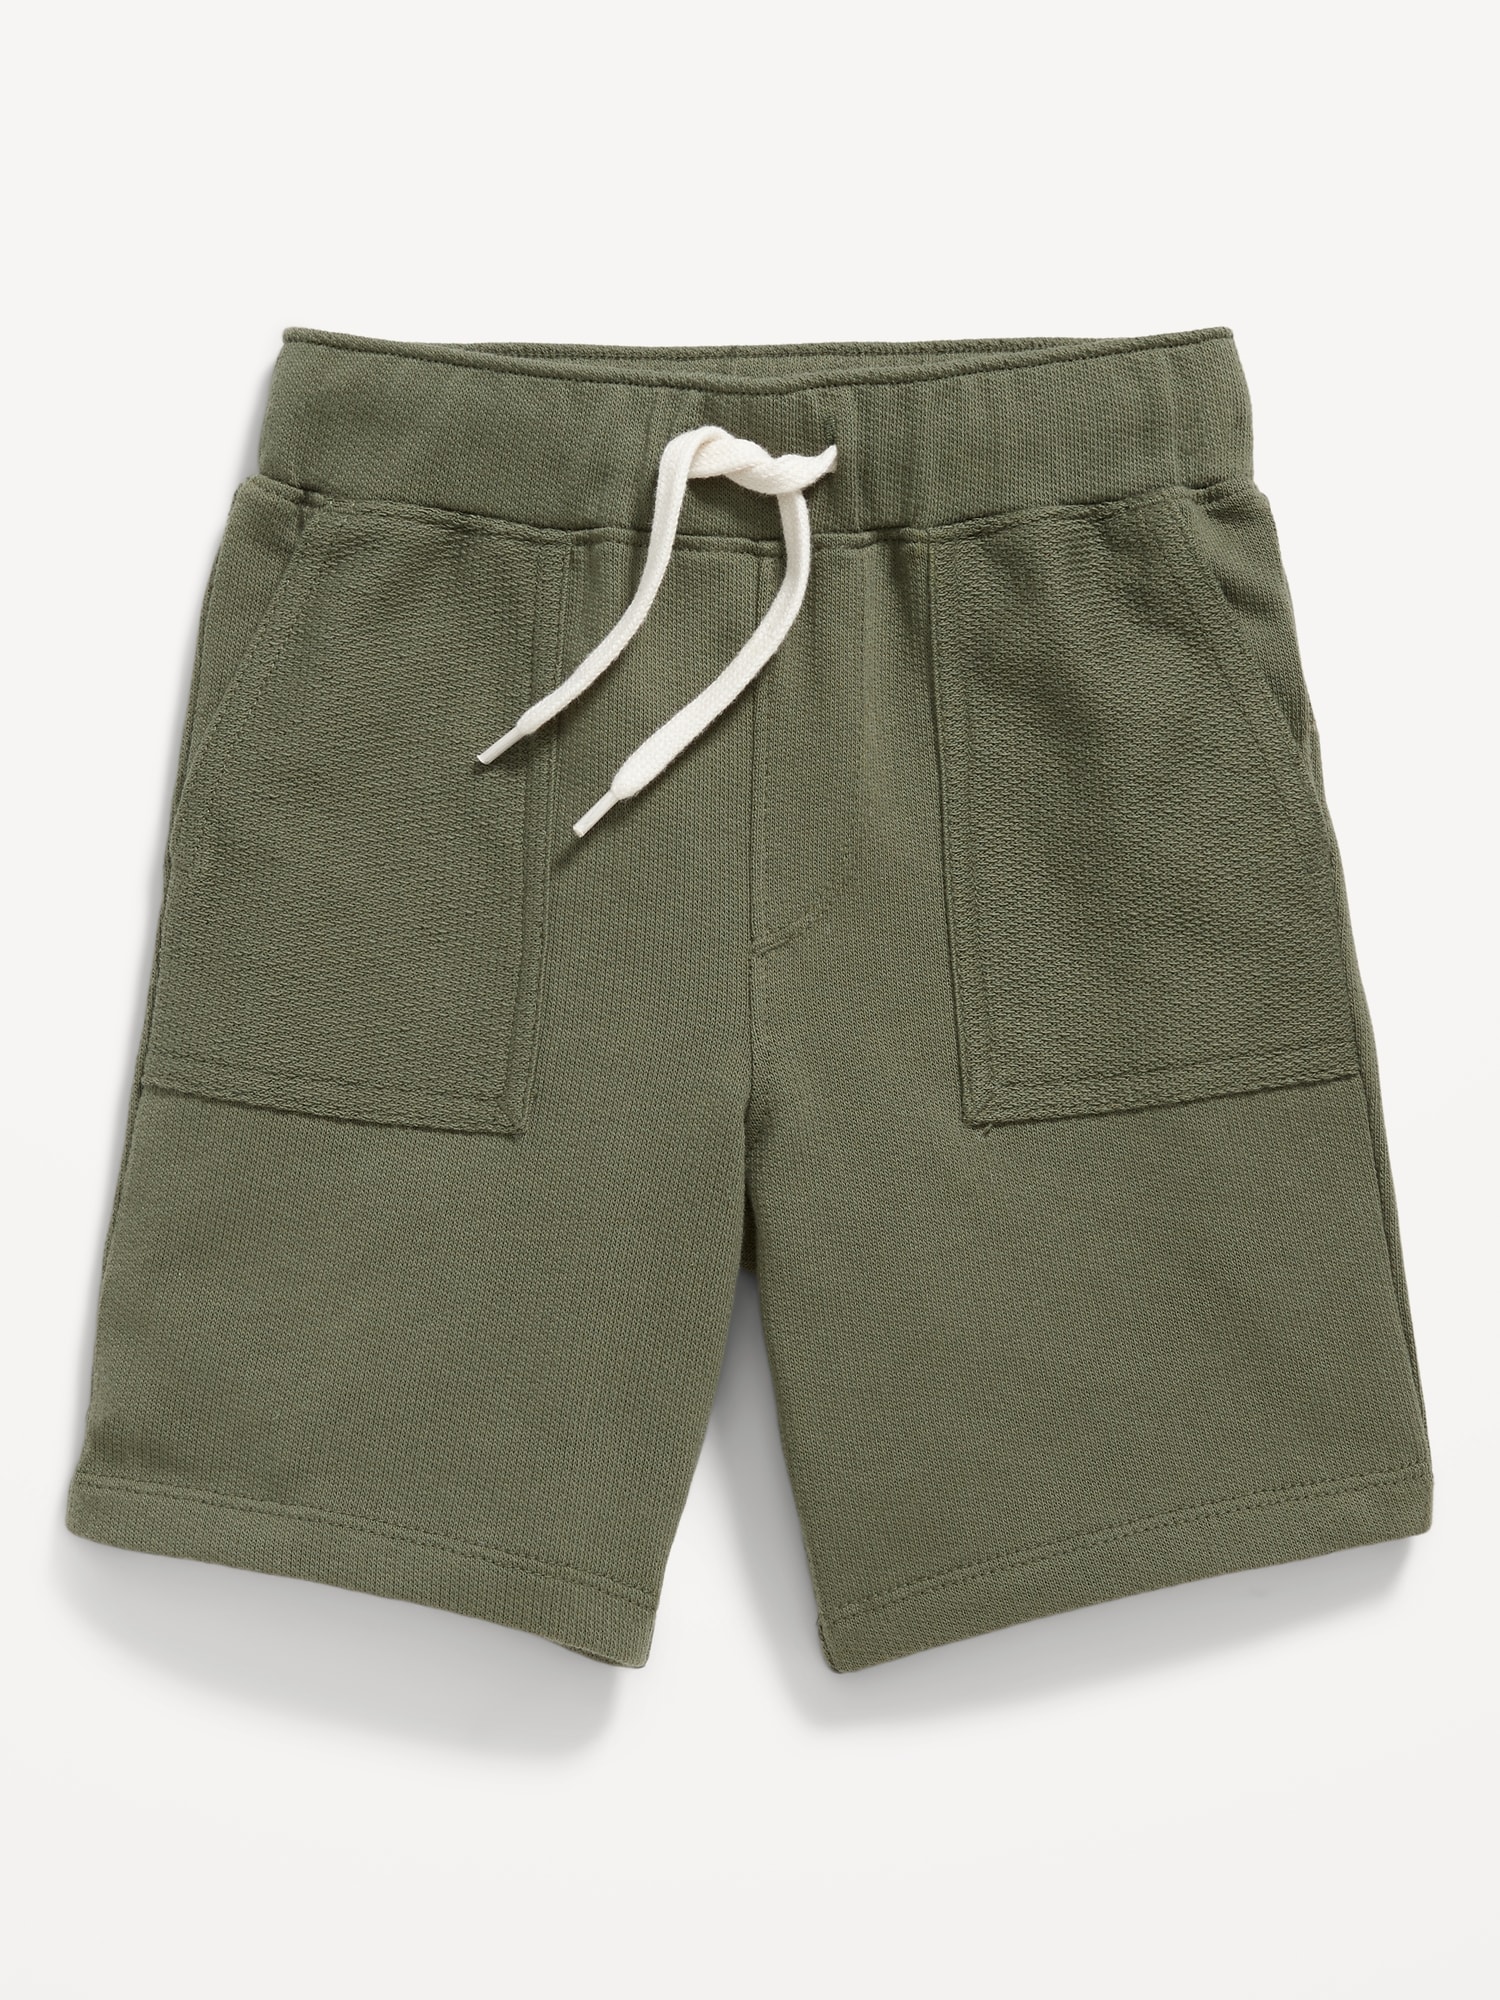 Old Navy French-Terry Drawstring Utility Shorts for Toddler Boys green. 1